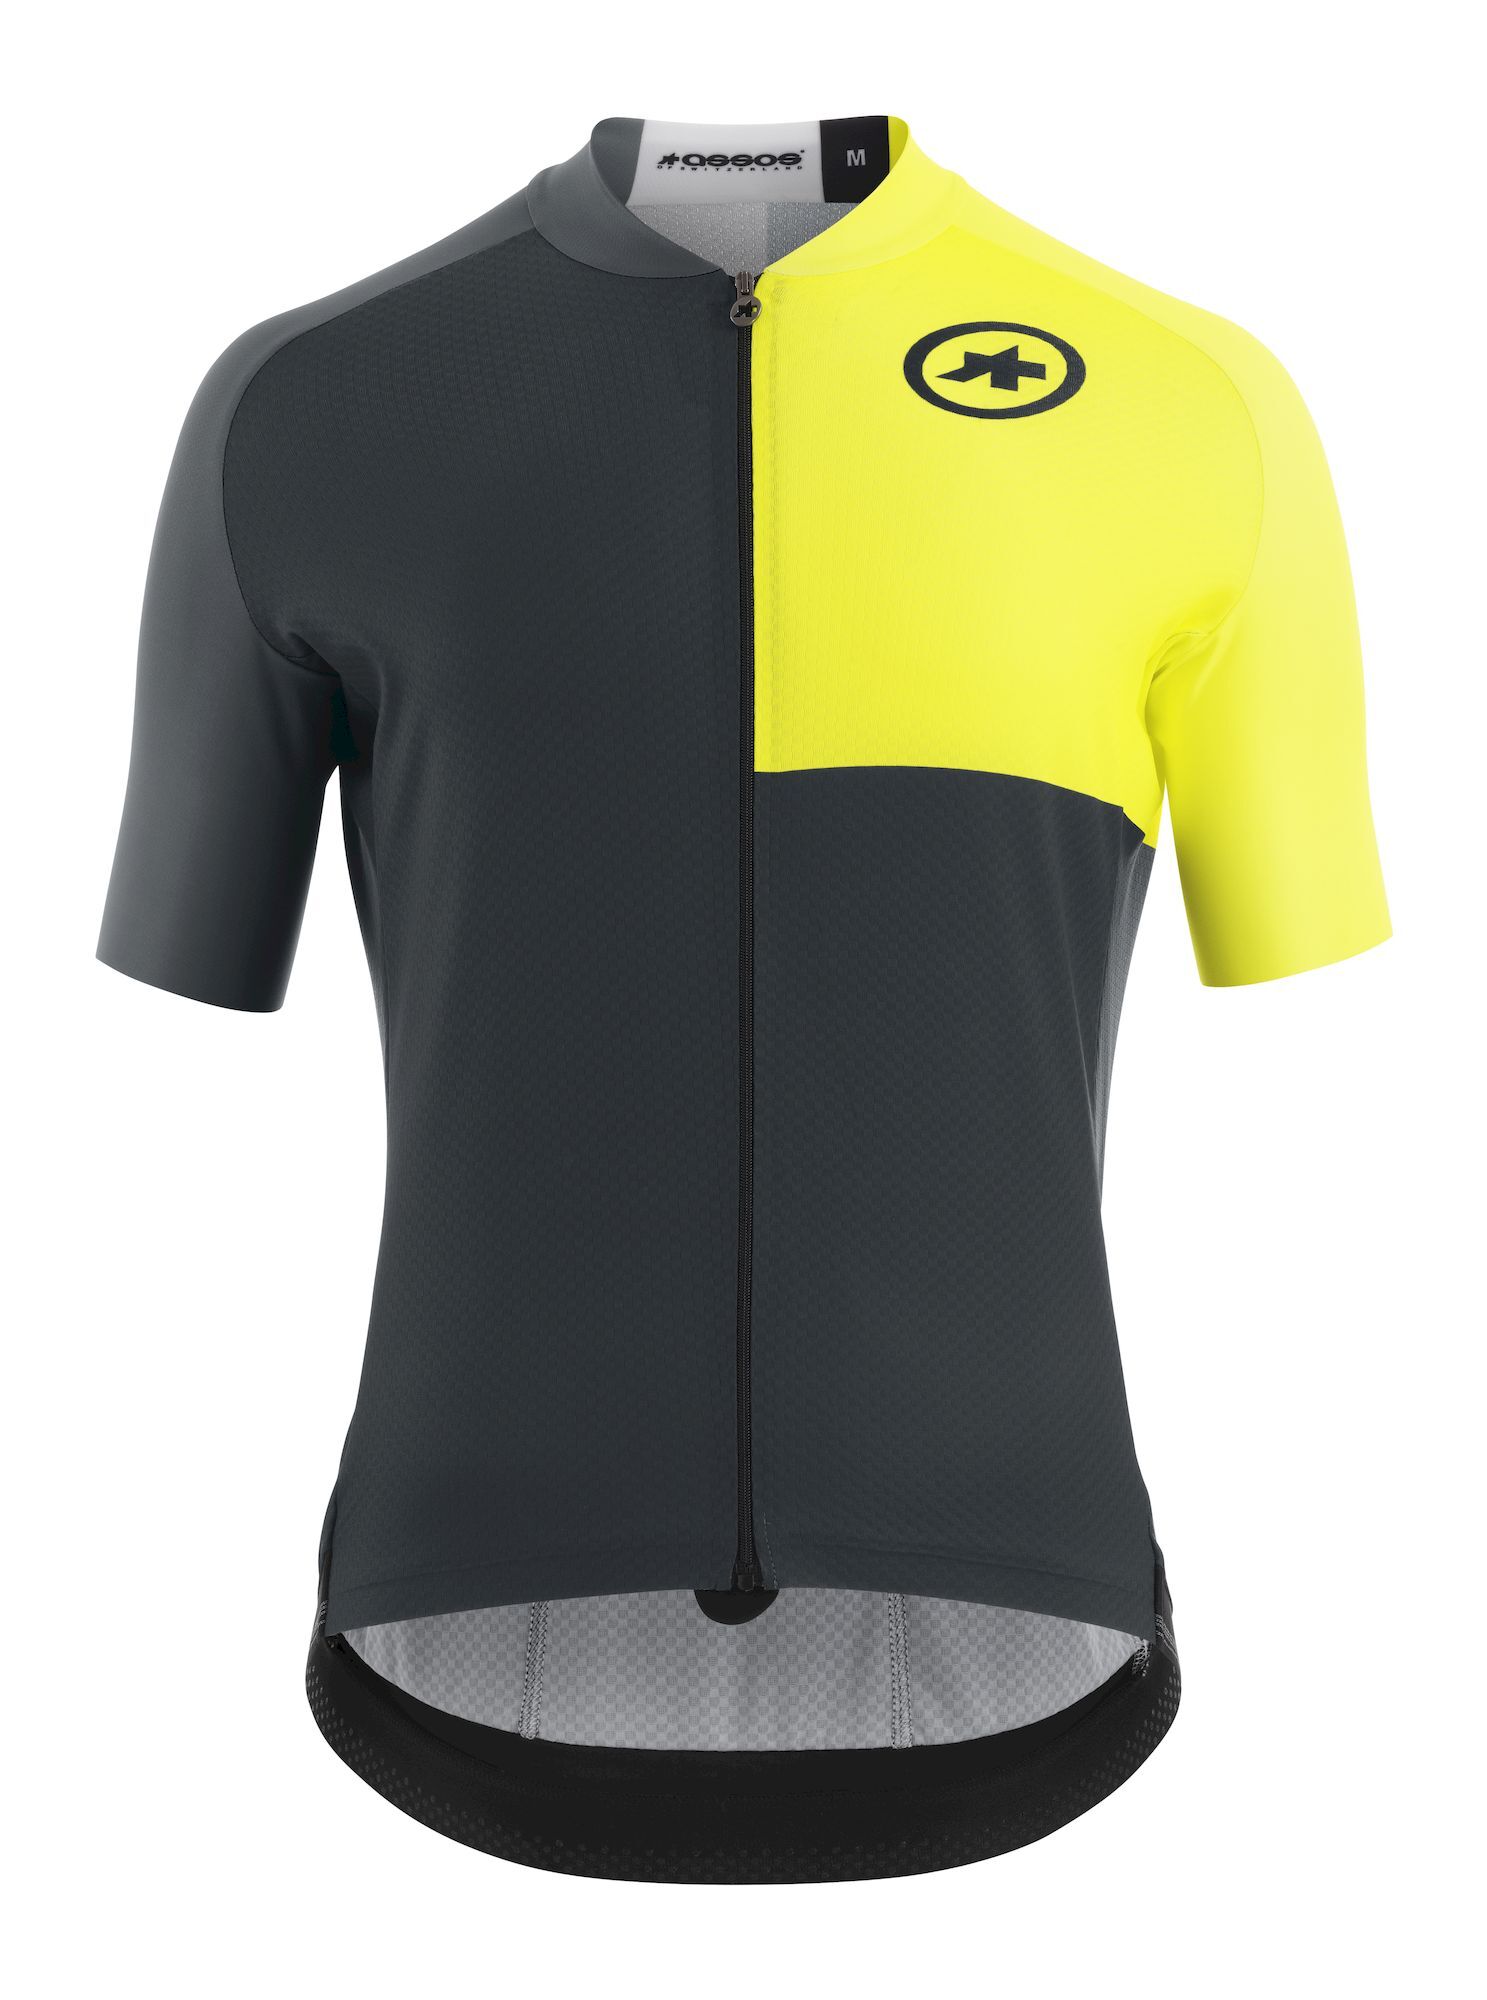 Assos Mille GT Jersey C2 EVO Stahlstern - Cycling jersey - Men's | Hardloop